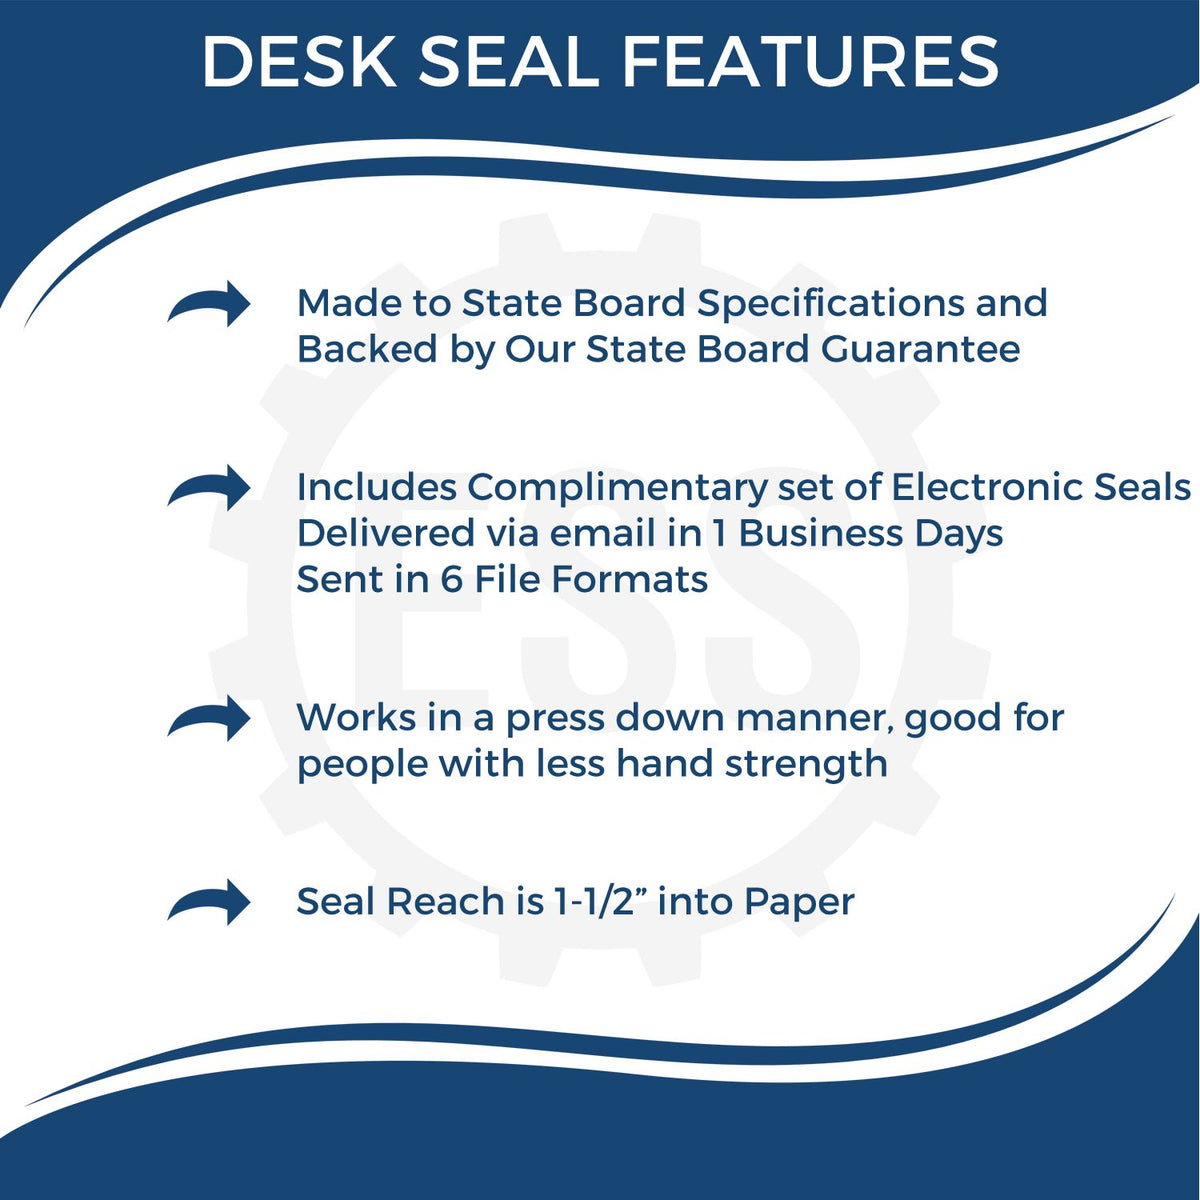 A picture of an infographic highlighting the selling points for the Maryland Geologist Desk Seal